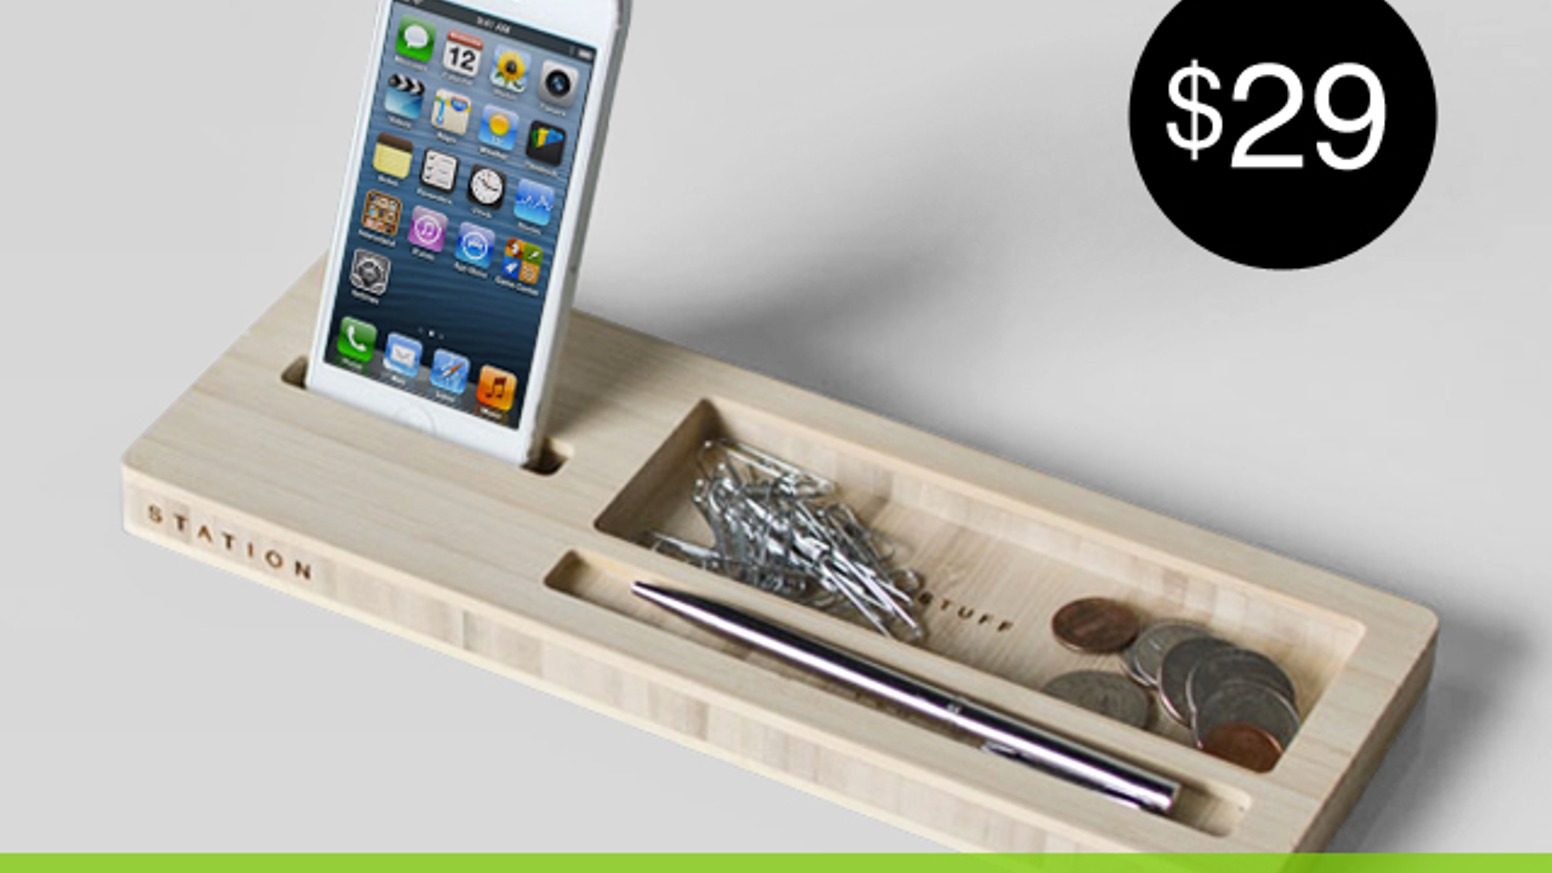 MODERN Caddy for your phone, keys, sunglasses, pens, loose change, etc. iPhone, Samsung Galaxy, Android and many more.